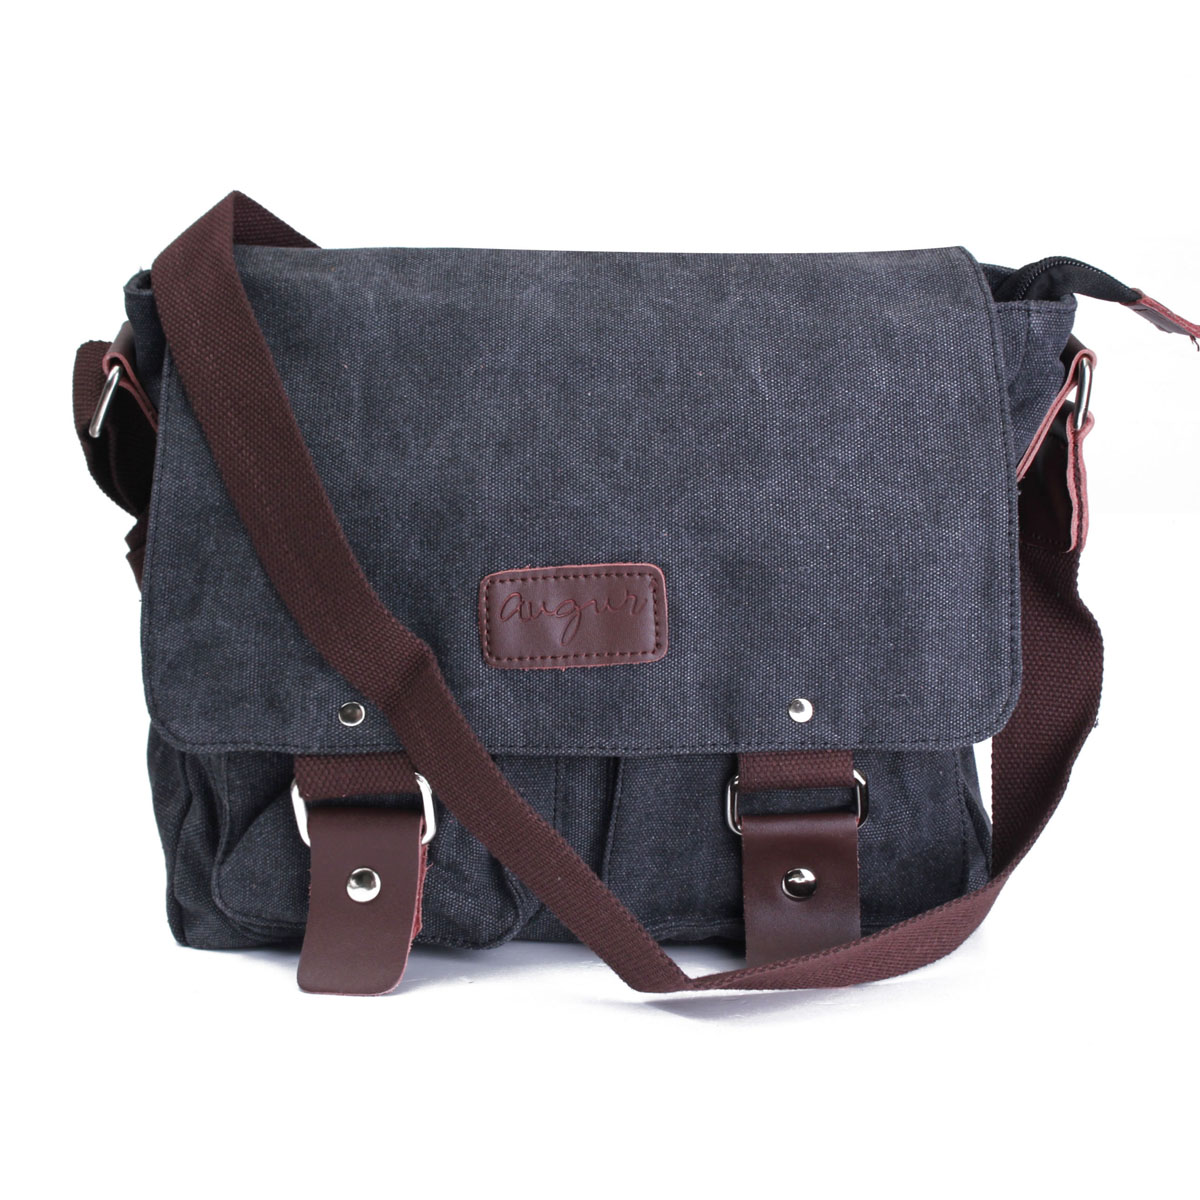 ... Shoes  Accessories  Men's Accessories  Backpacks, Bags  Briefcases